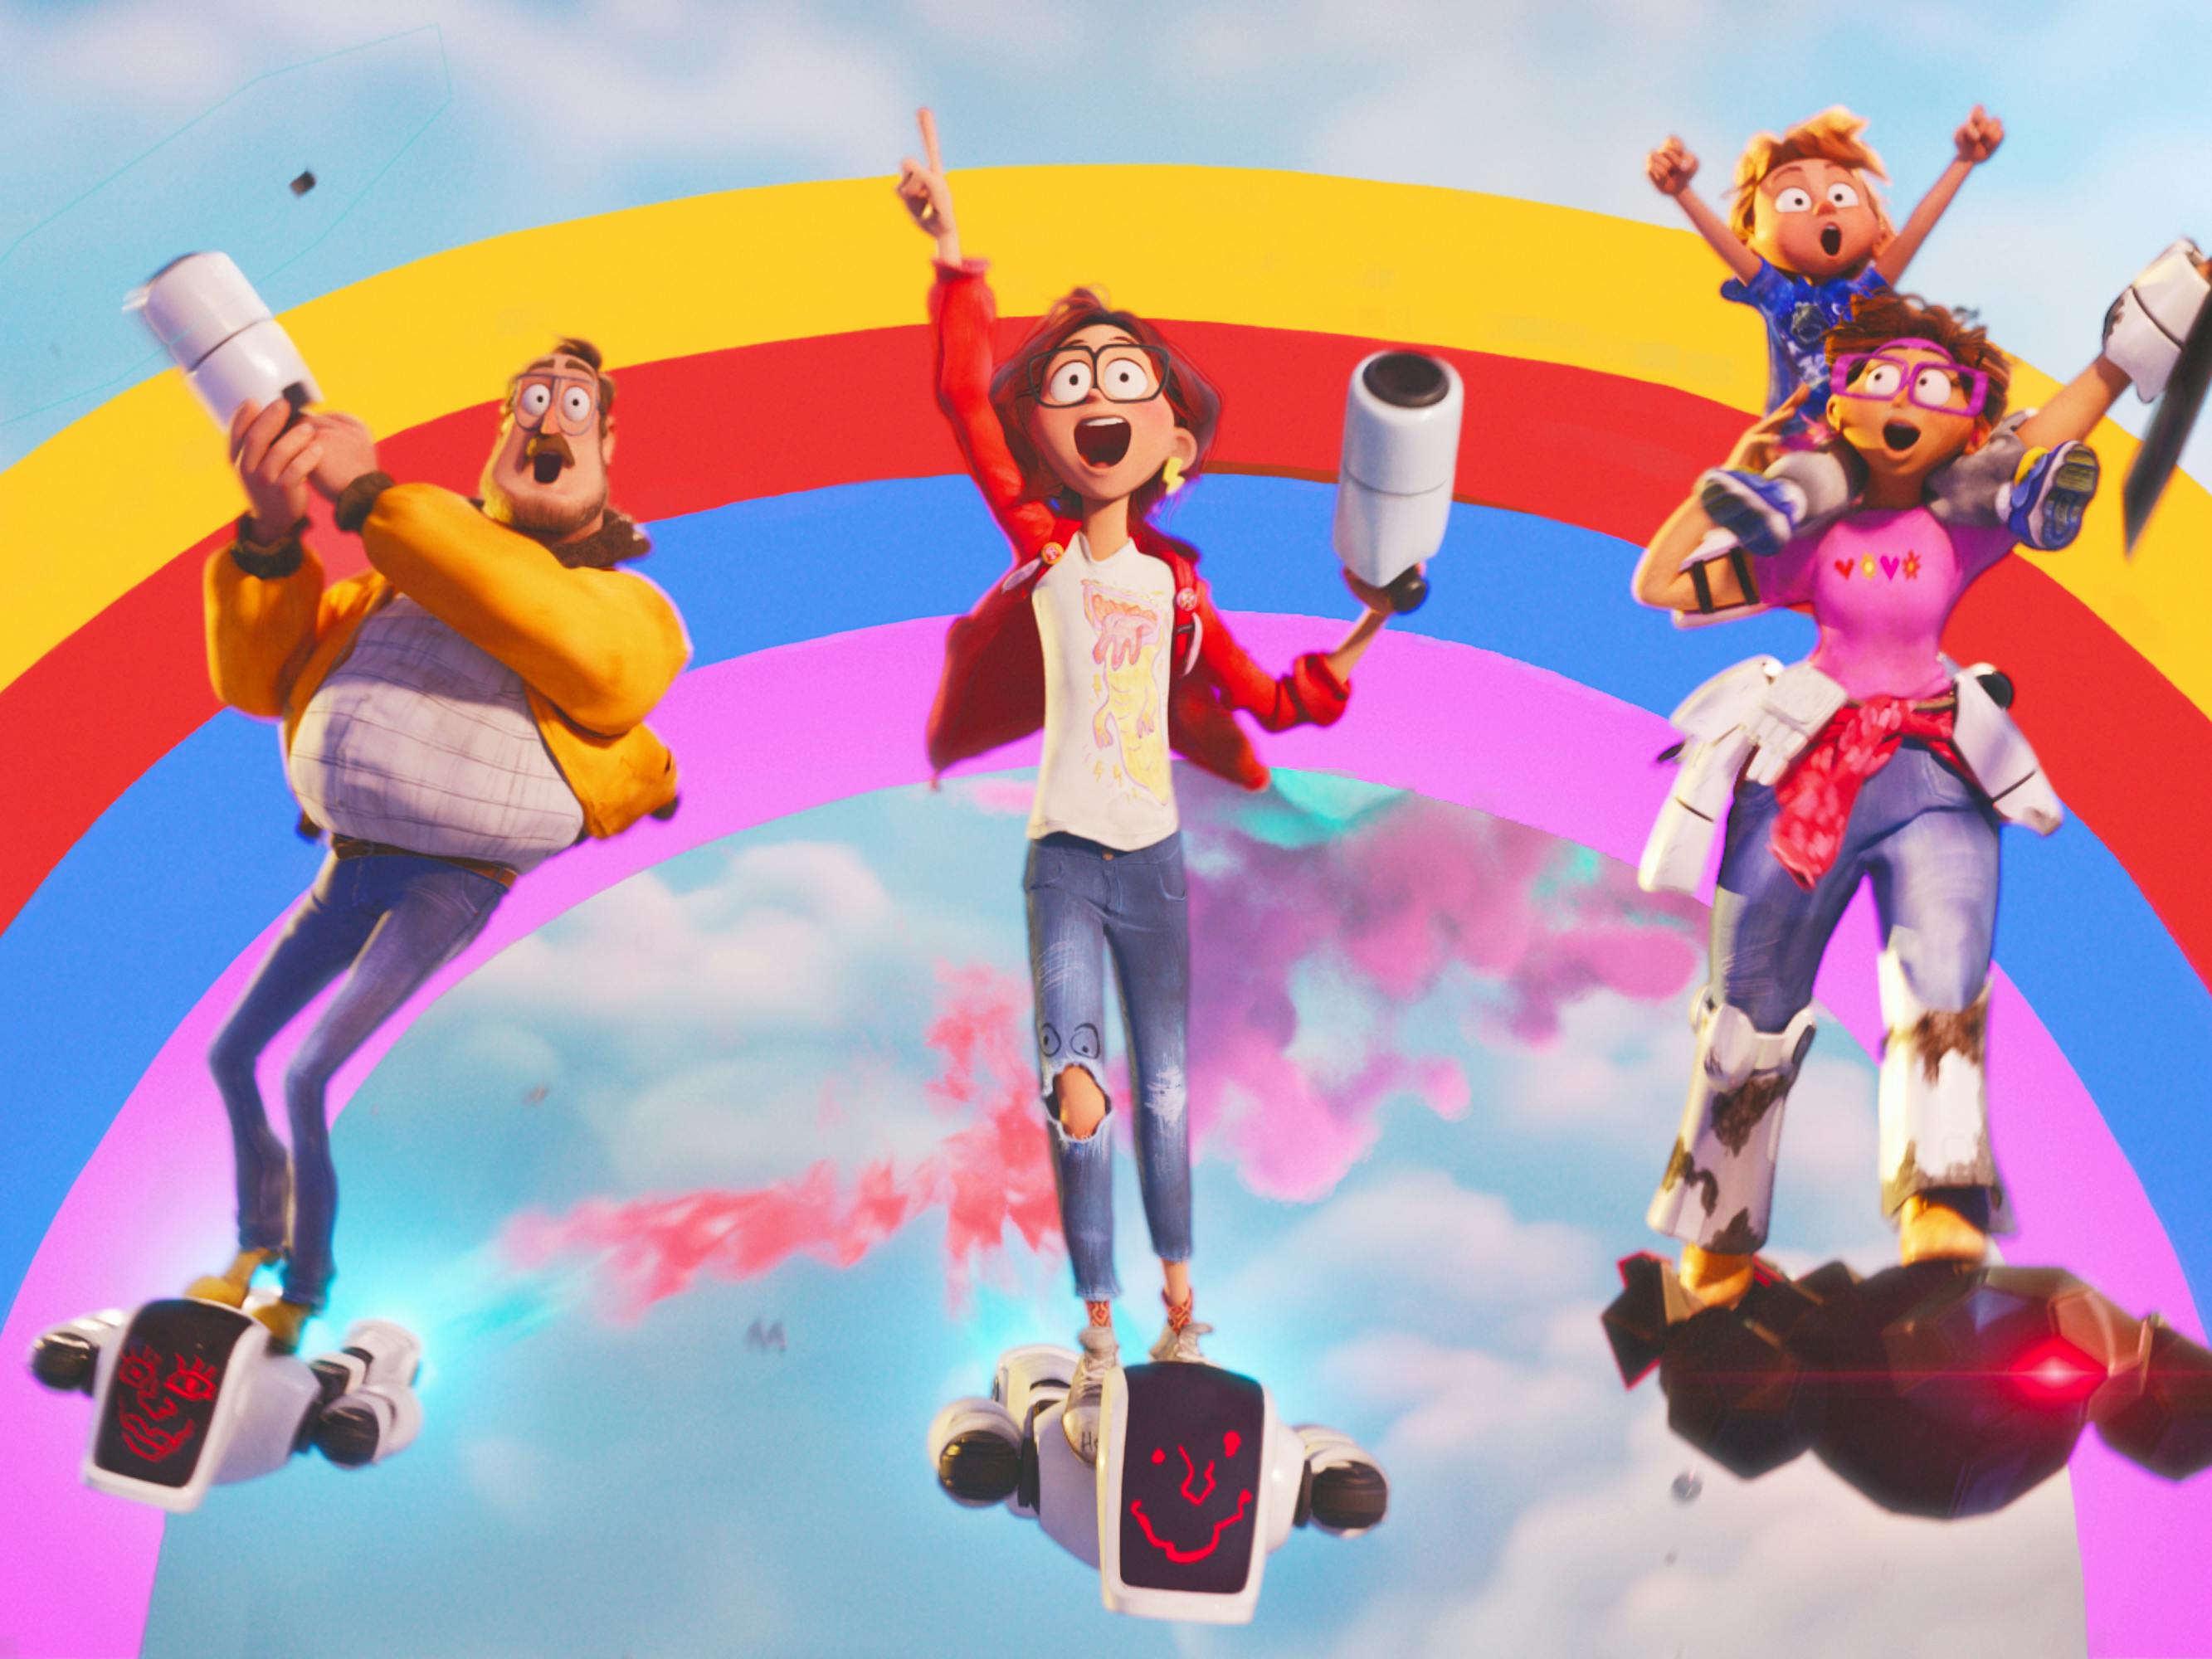 The Mitchells zoom under a rainbow on little robots. Mr. Mitchell wears jeans and a yellow jacket. Katie wears ripped jeans, a white t-shirt, and a red hoodie. Mrs. Mitchell wears a pink t-shirt and massive red glasses. 